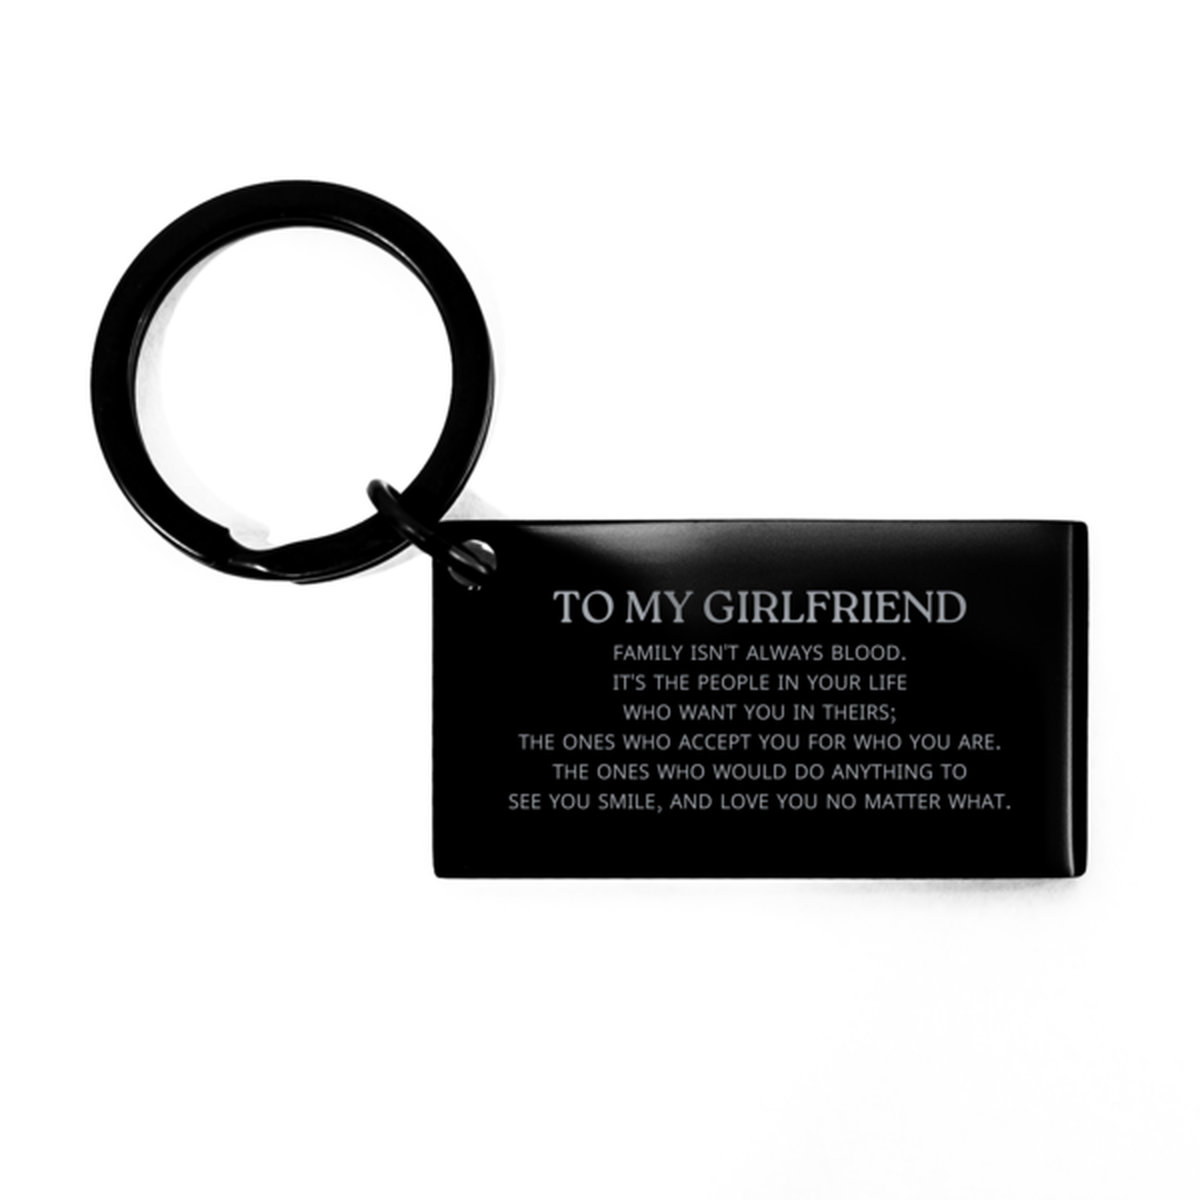 To My Girlfriend Gifts, Family isn't always blood, Girlfriend Keychain, Birthday Christmas Unique Present For Girlfriend